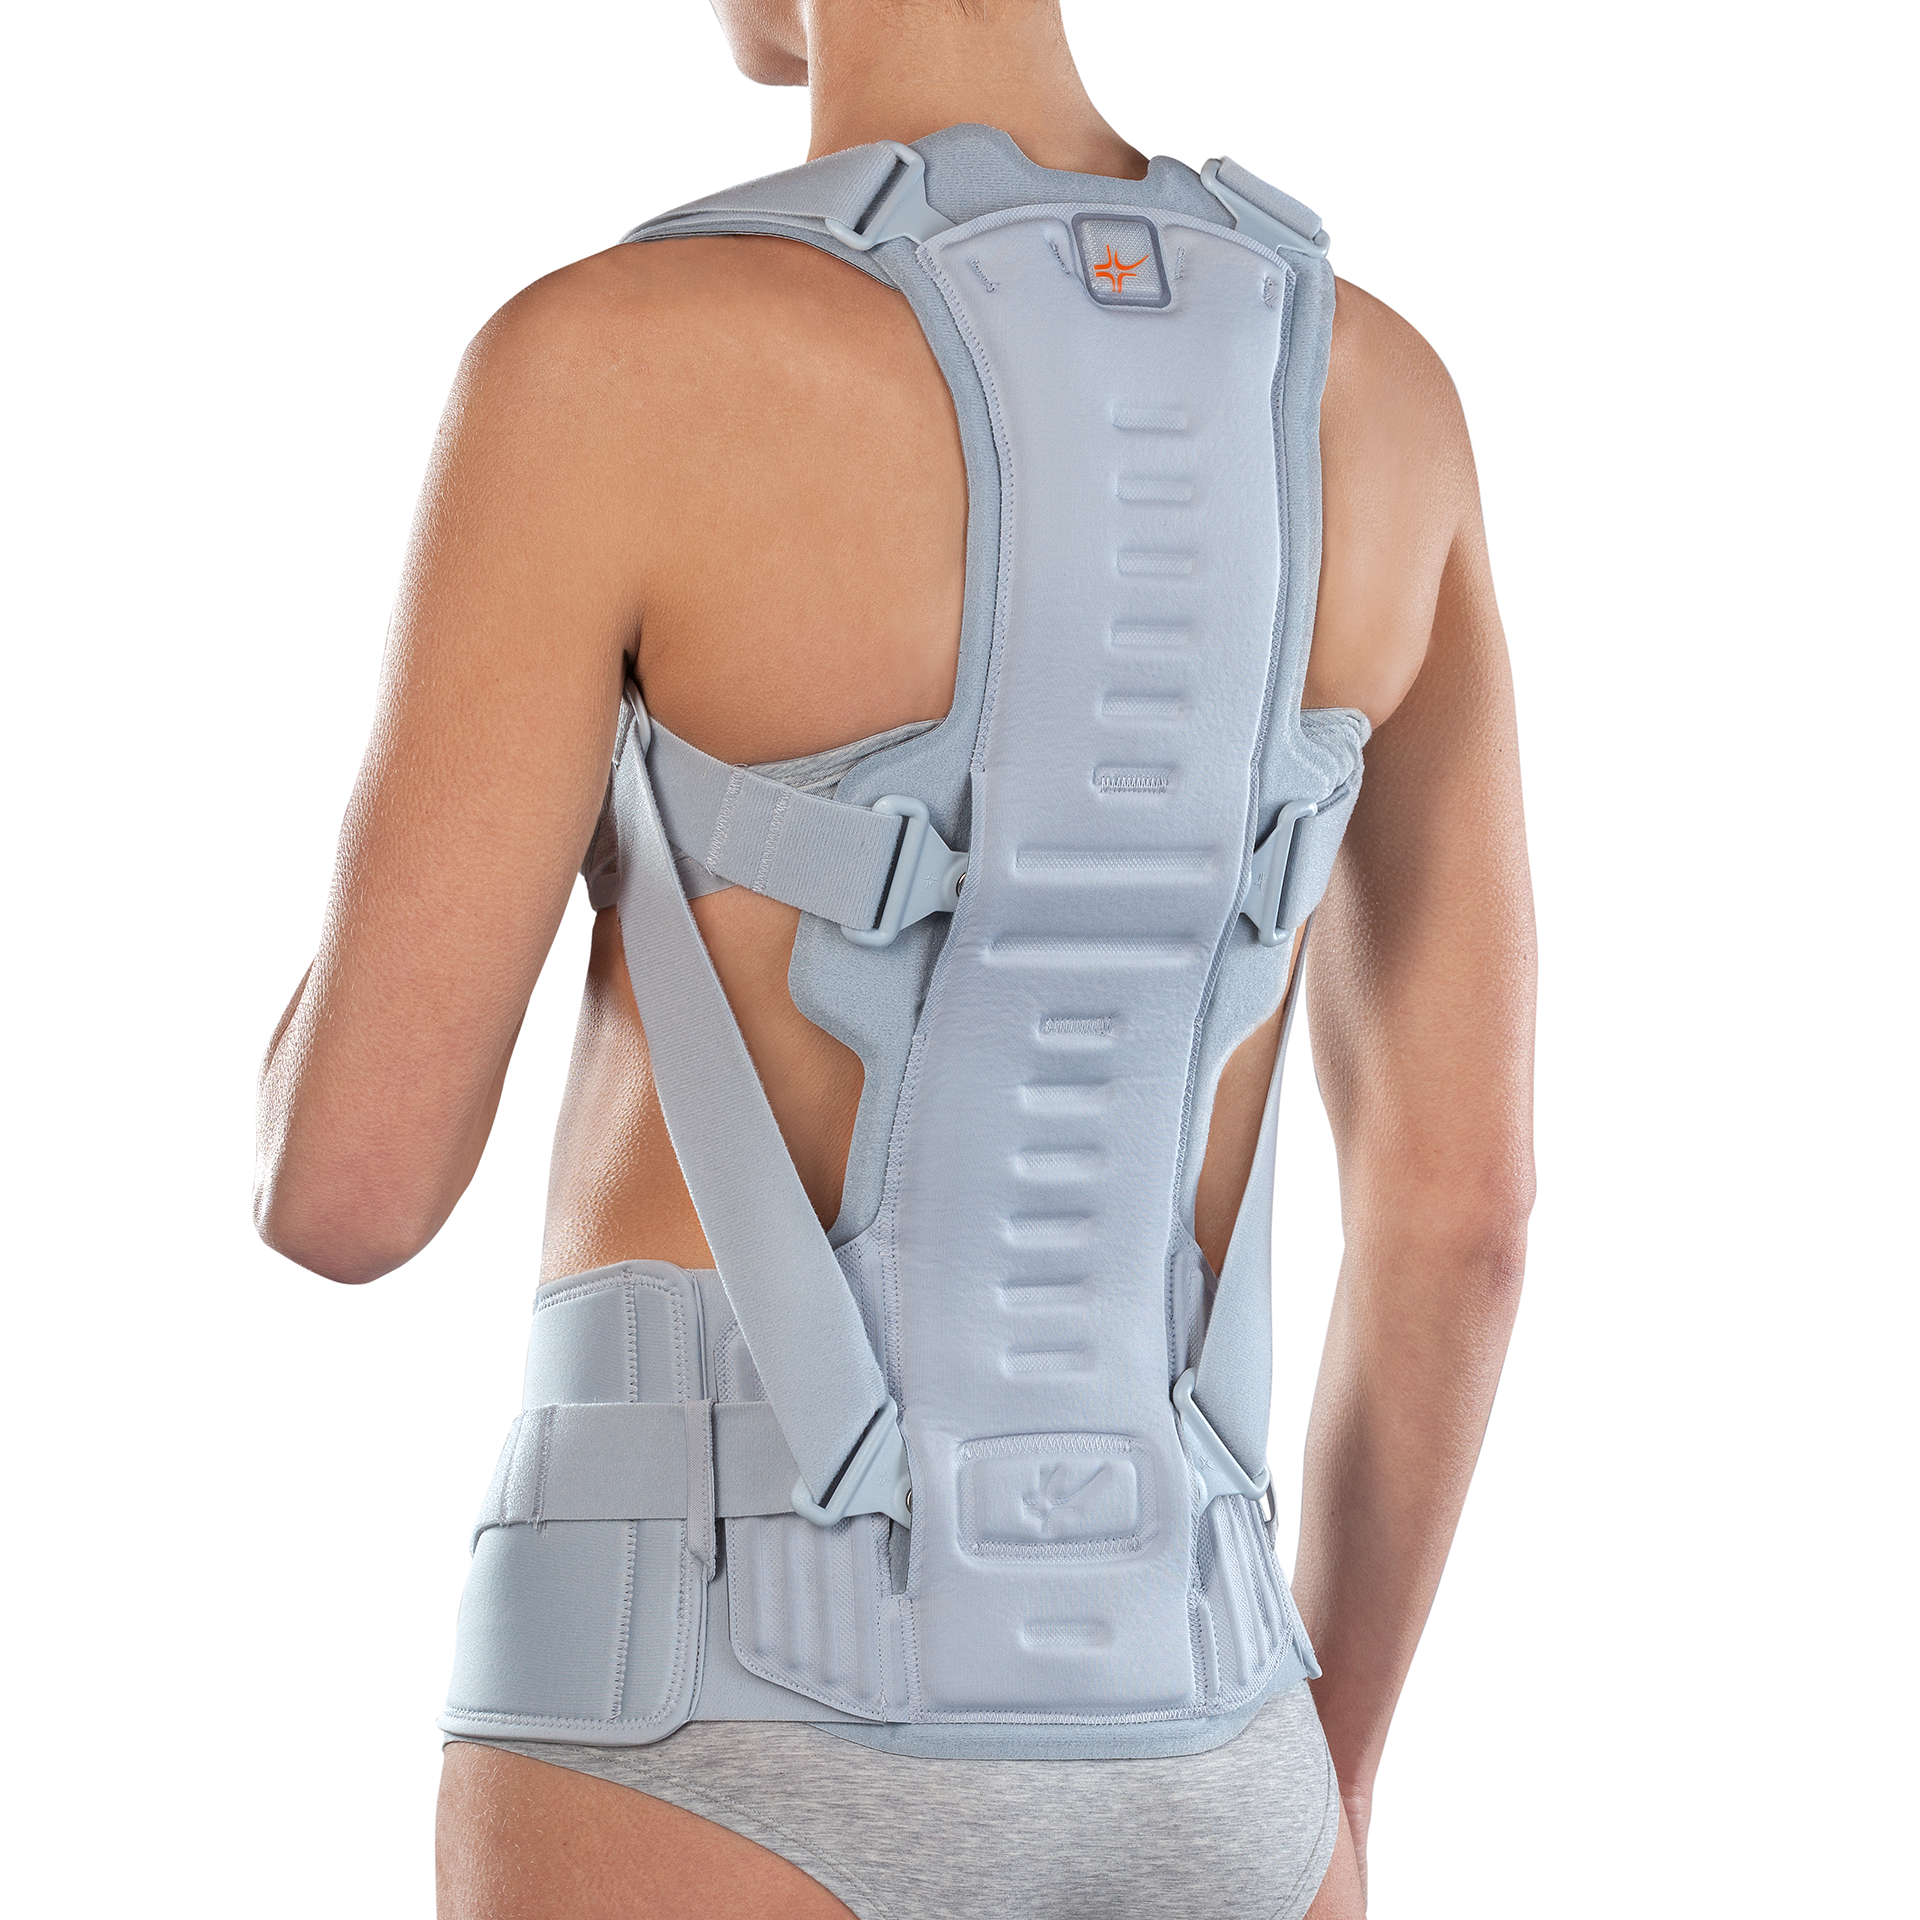 Hyperkyphosis, Osteoporosis Of Spine, Taylor Brace-Spinomed II at Rs 16698, Orthopedic Braces in Kolkata